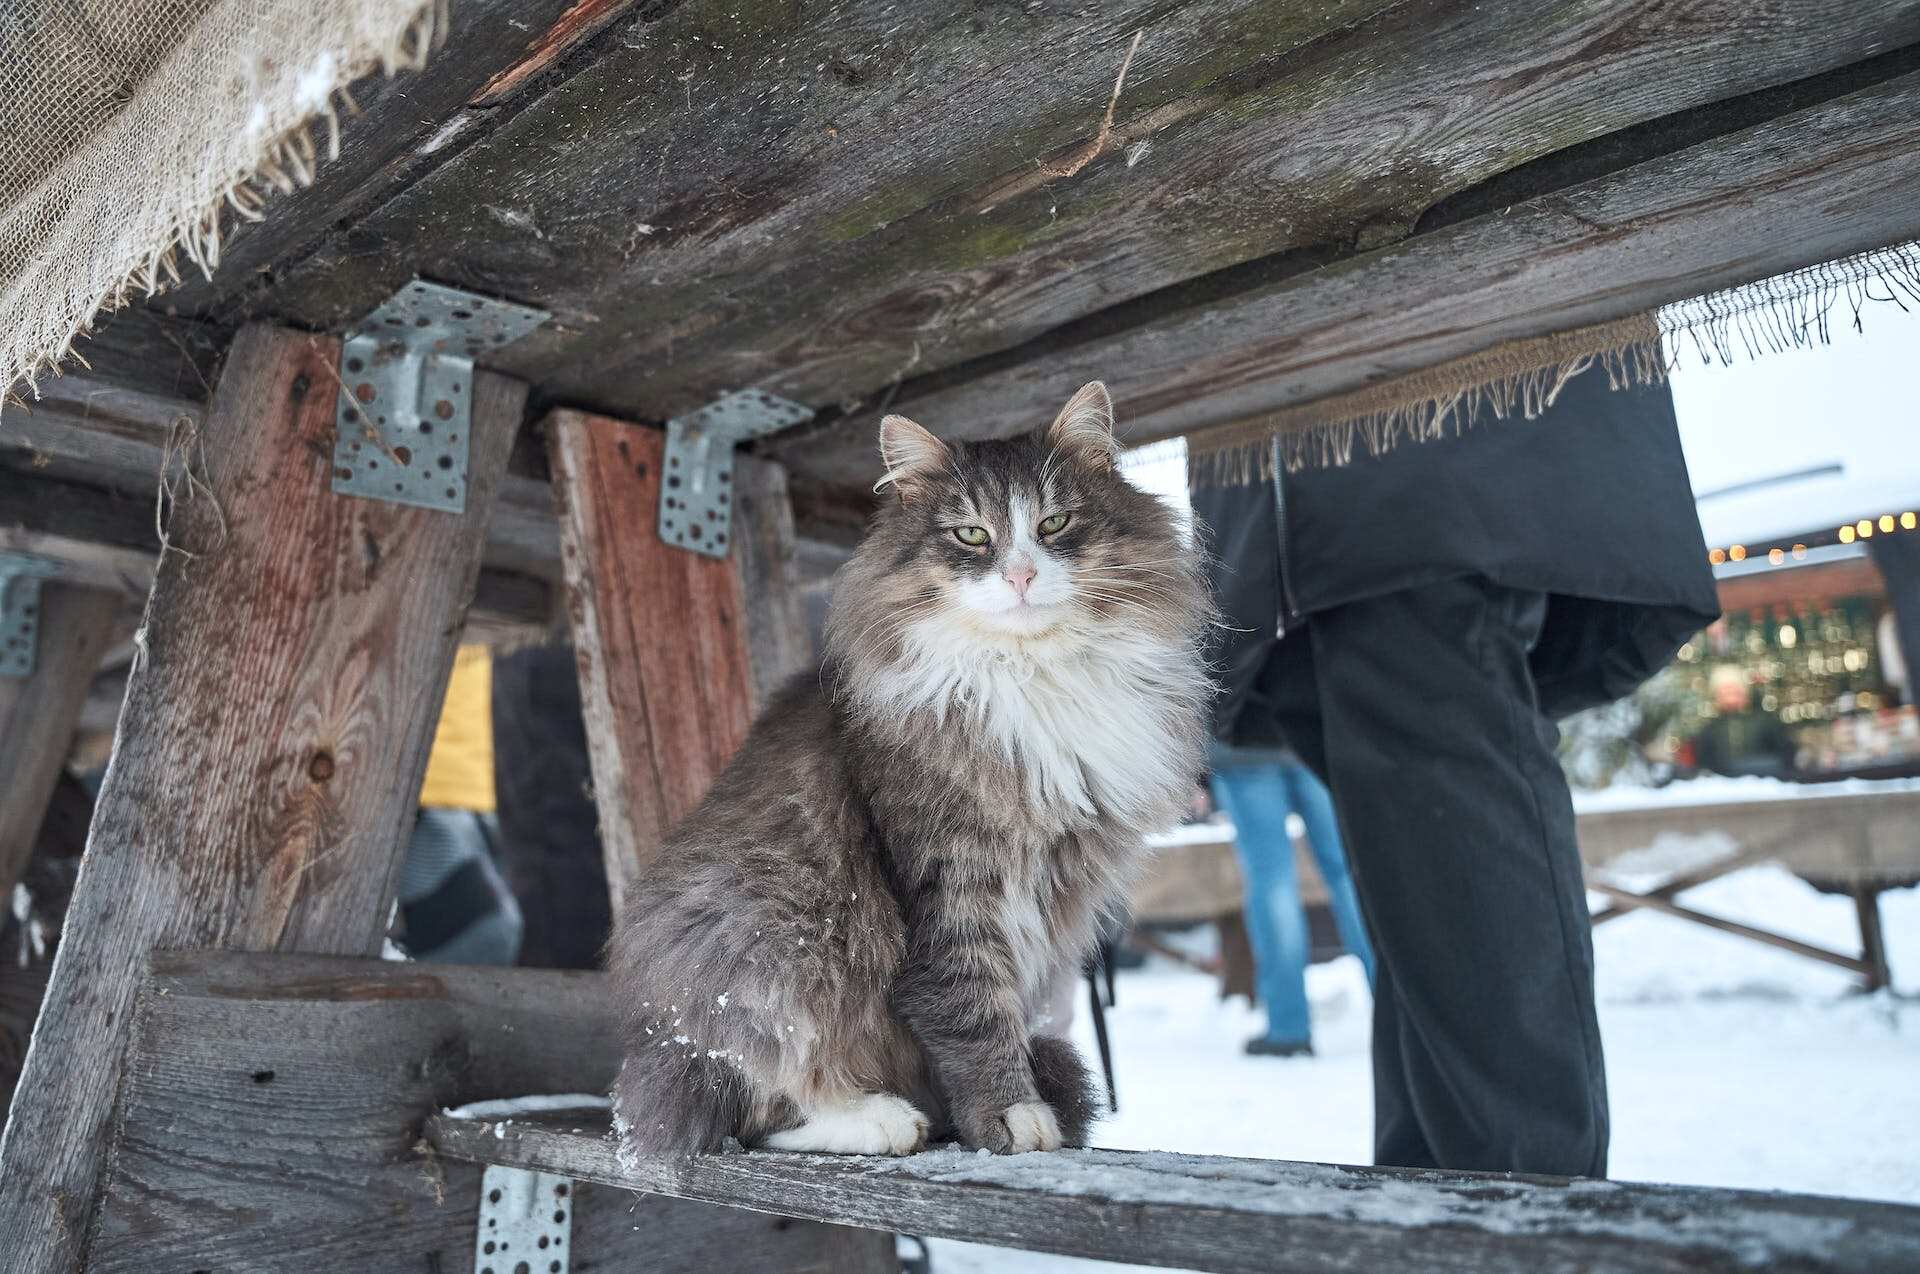 A Norwegian Forest cat sitting at a wooden log table outdoors